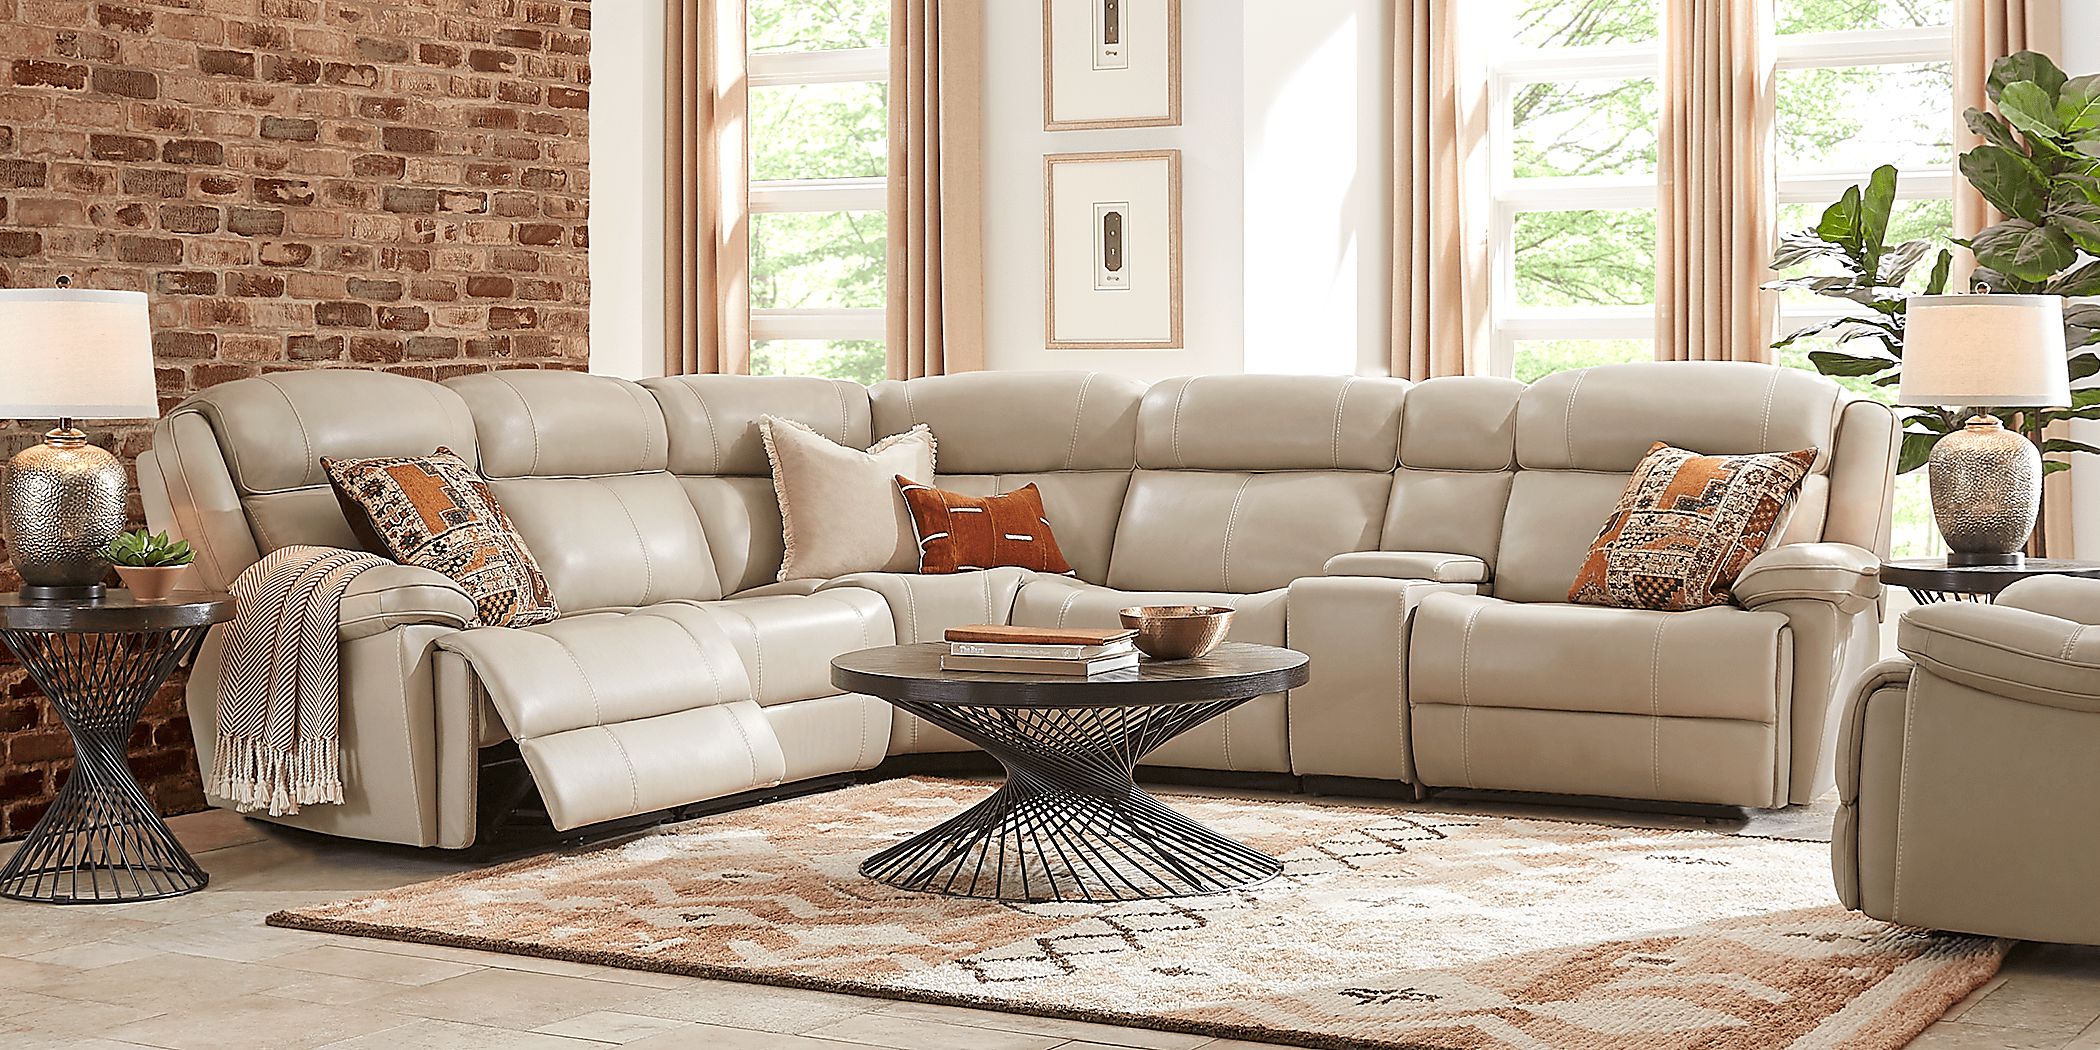 Rooms To Go West Valley Beige 6 Pc Leather Reclining Sectional